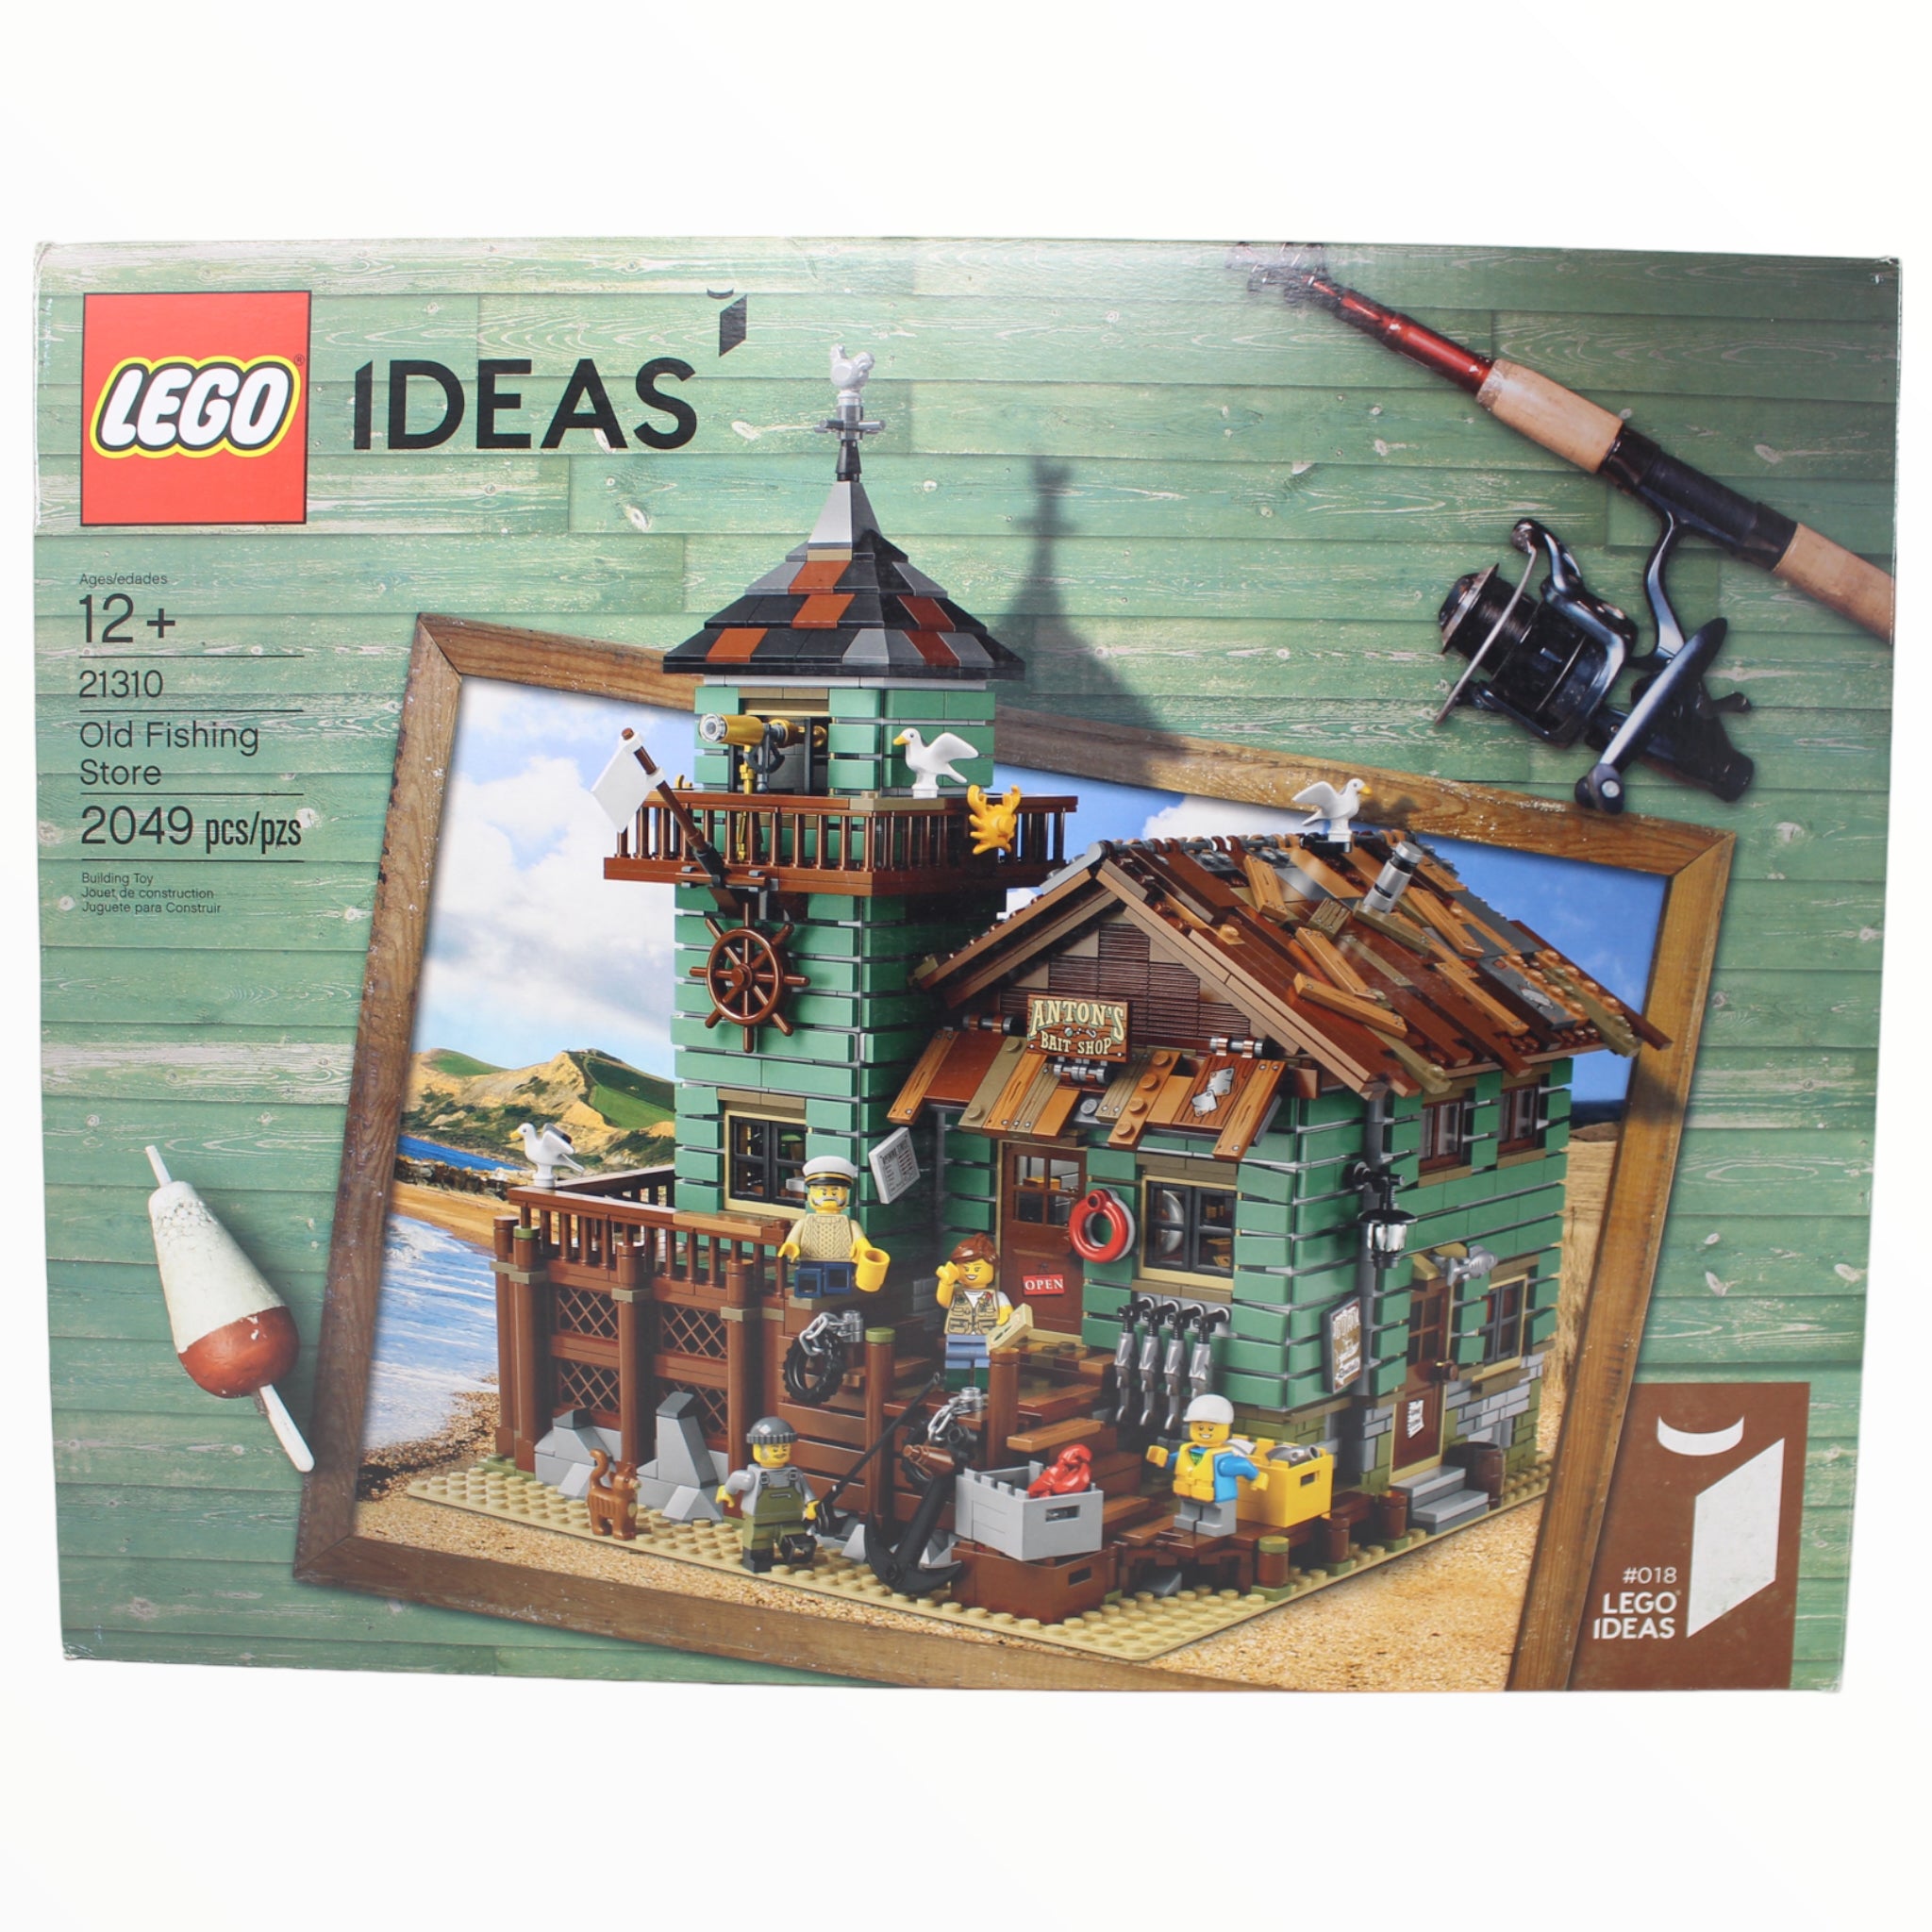 Certified Used Set 21310 LEGO Ideas Old Fishing Store